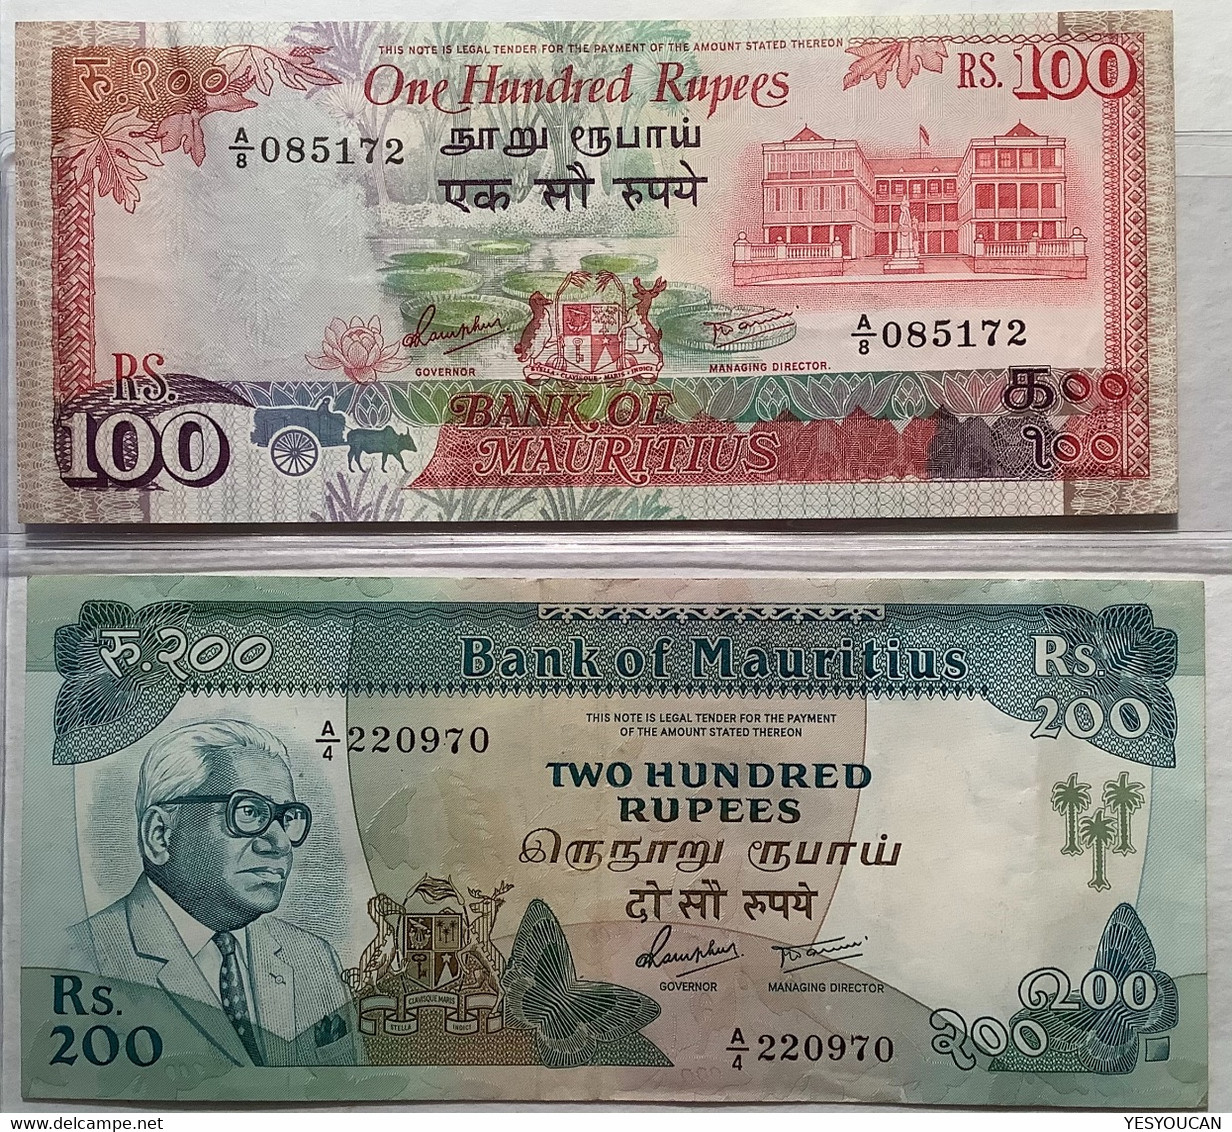 Bank Of Mauritius 1985-1991 ND: 5, 10, 100, 200 Rs P.34-35a-38-39a FINE-XF (Rupees Banknote Billet Commonwealth - Mauritius